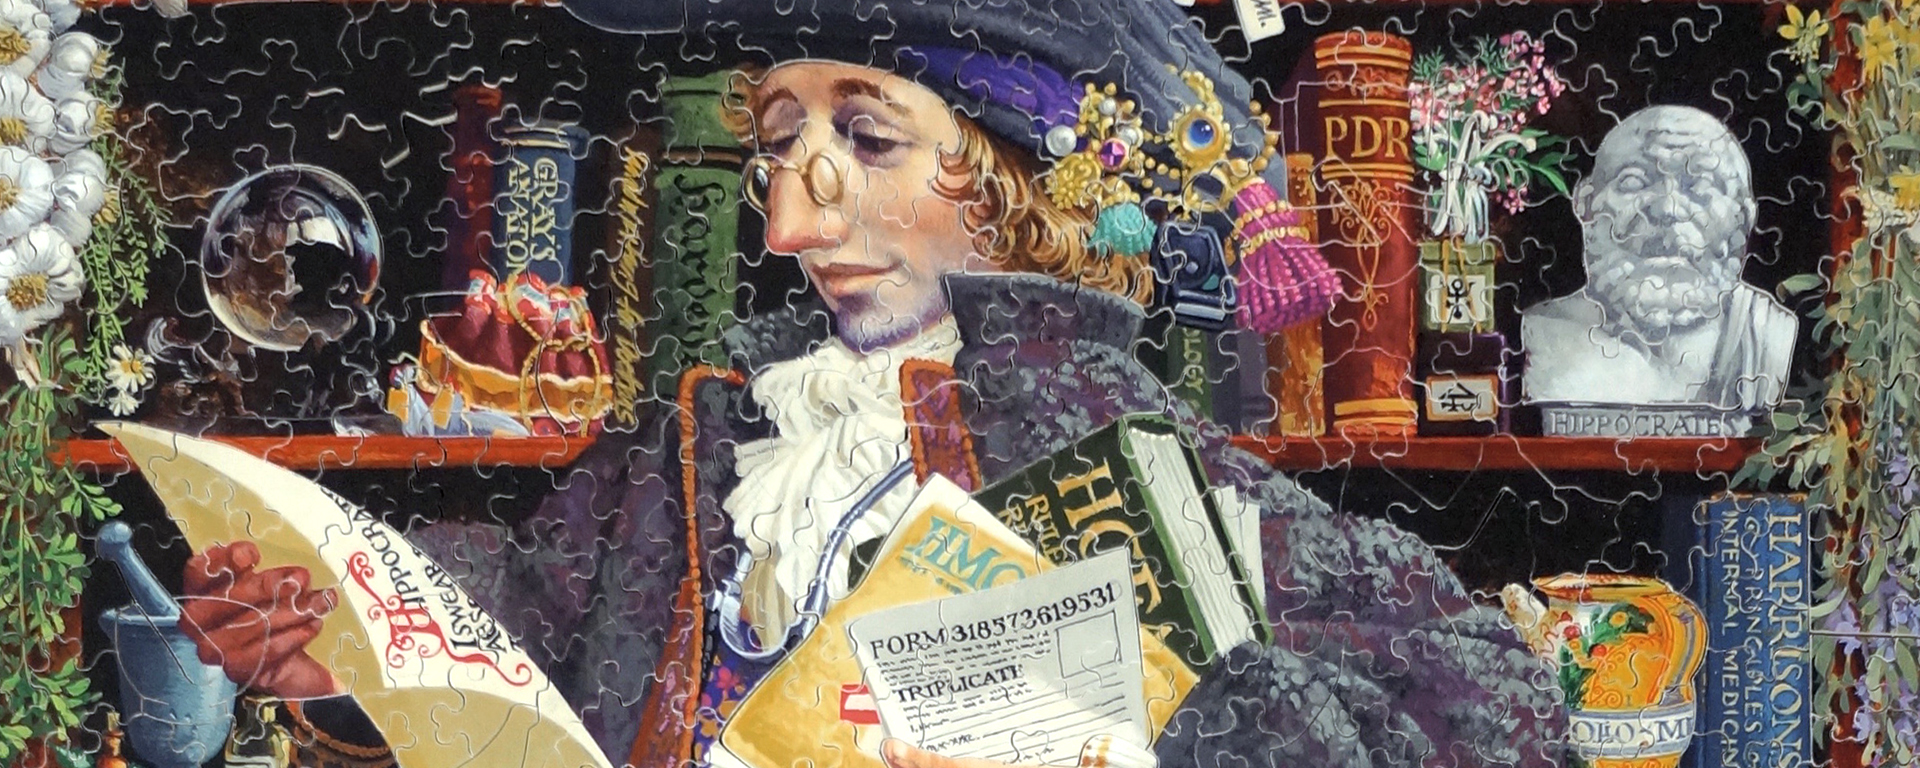 Wooden professionals jigsaw puzzle of The Oath by James Christensen. A man from the past is looking at a hand written document with a bookshelf in the background.